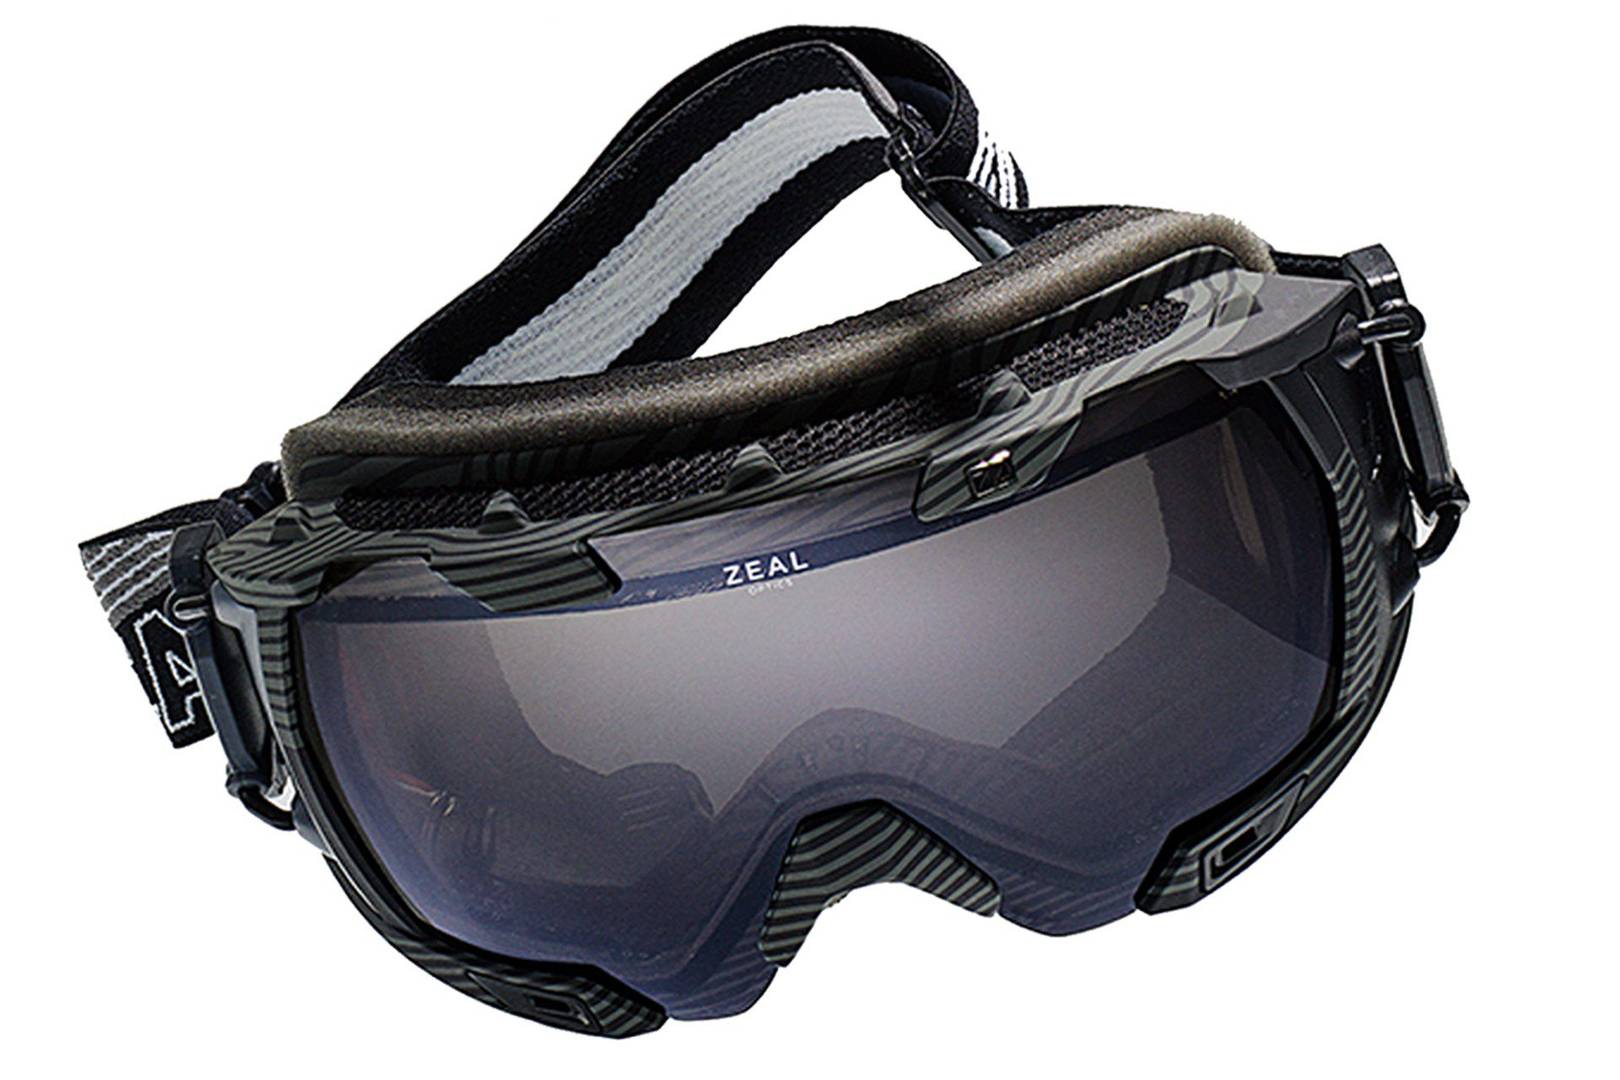 Reviewed HUD ski goggles from Smith Optics, Oakley and Zeal Optics